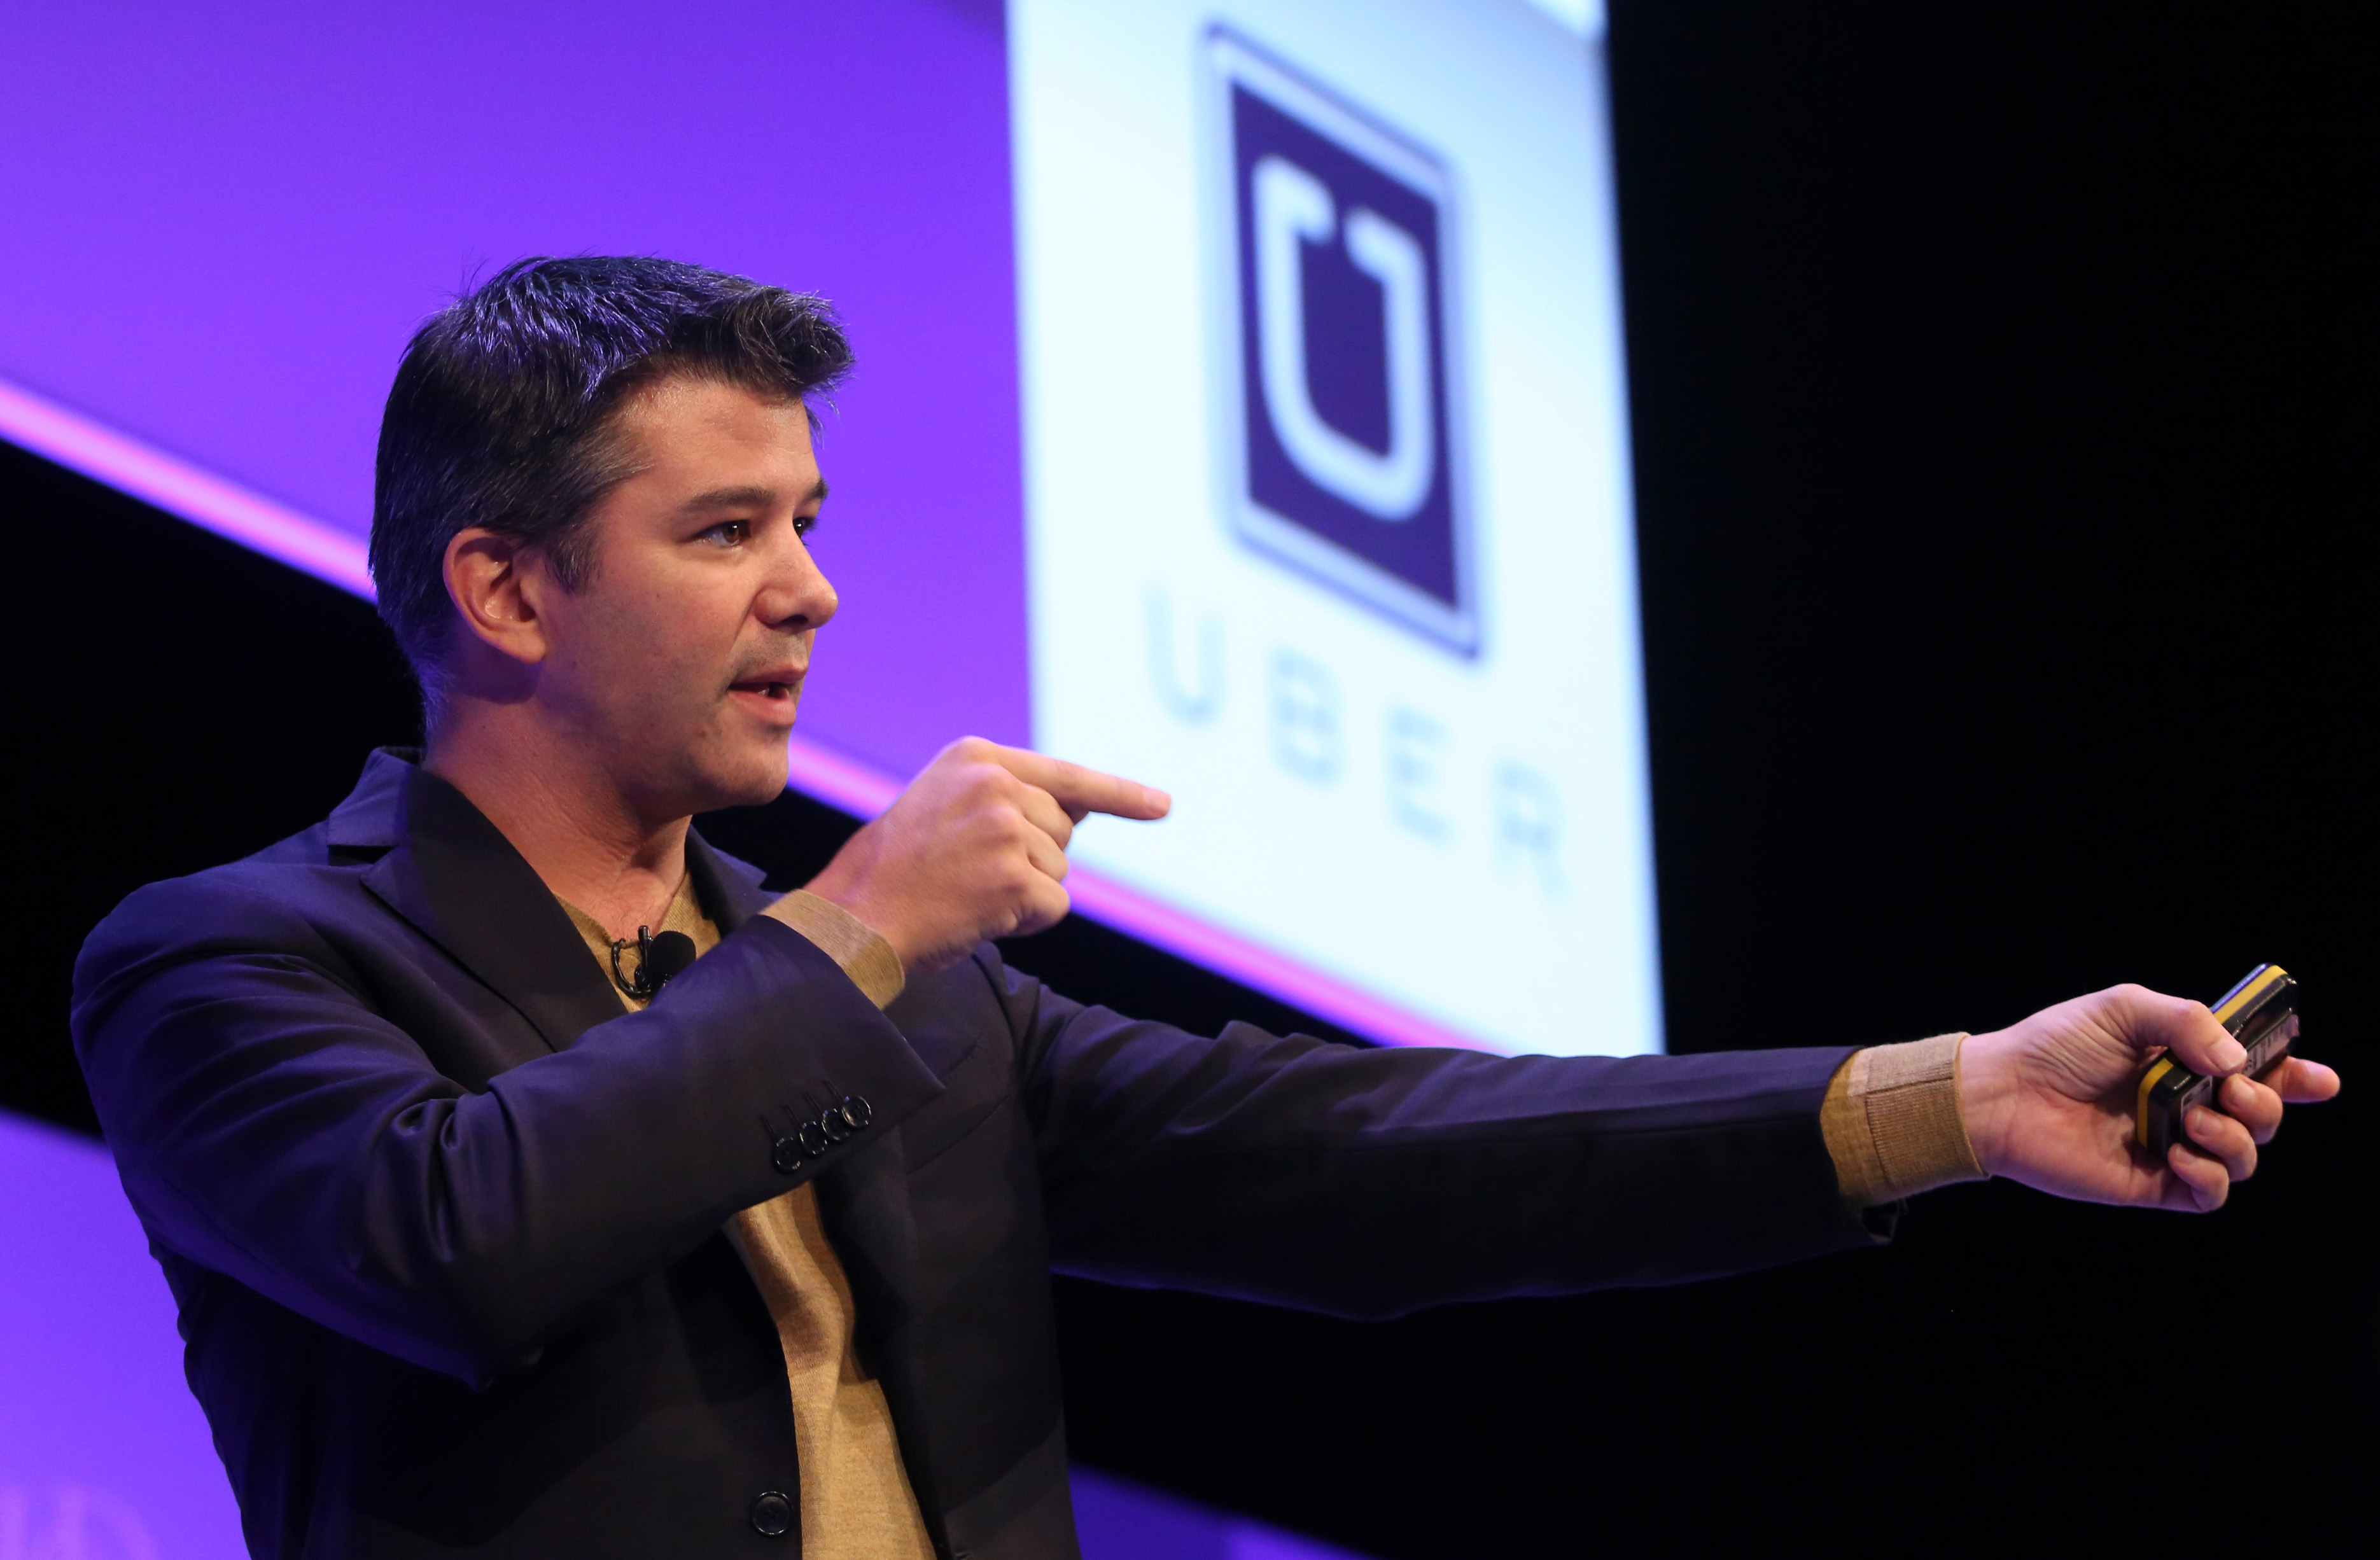 Travis Kalanick, chief executive officer of Uber Technologies Inc., gestures as he speaks during the Institute of Directors (IOD) annual convention at the Royal Albert Hall in London, U.K., on Oct. 3, 2014.